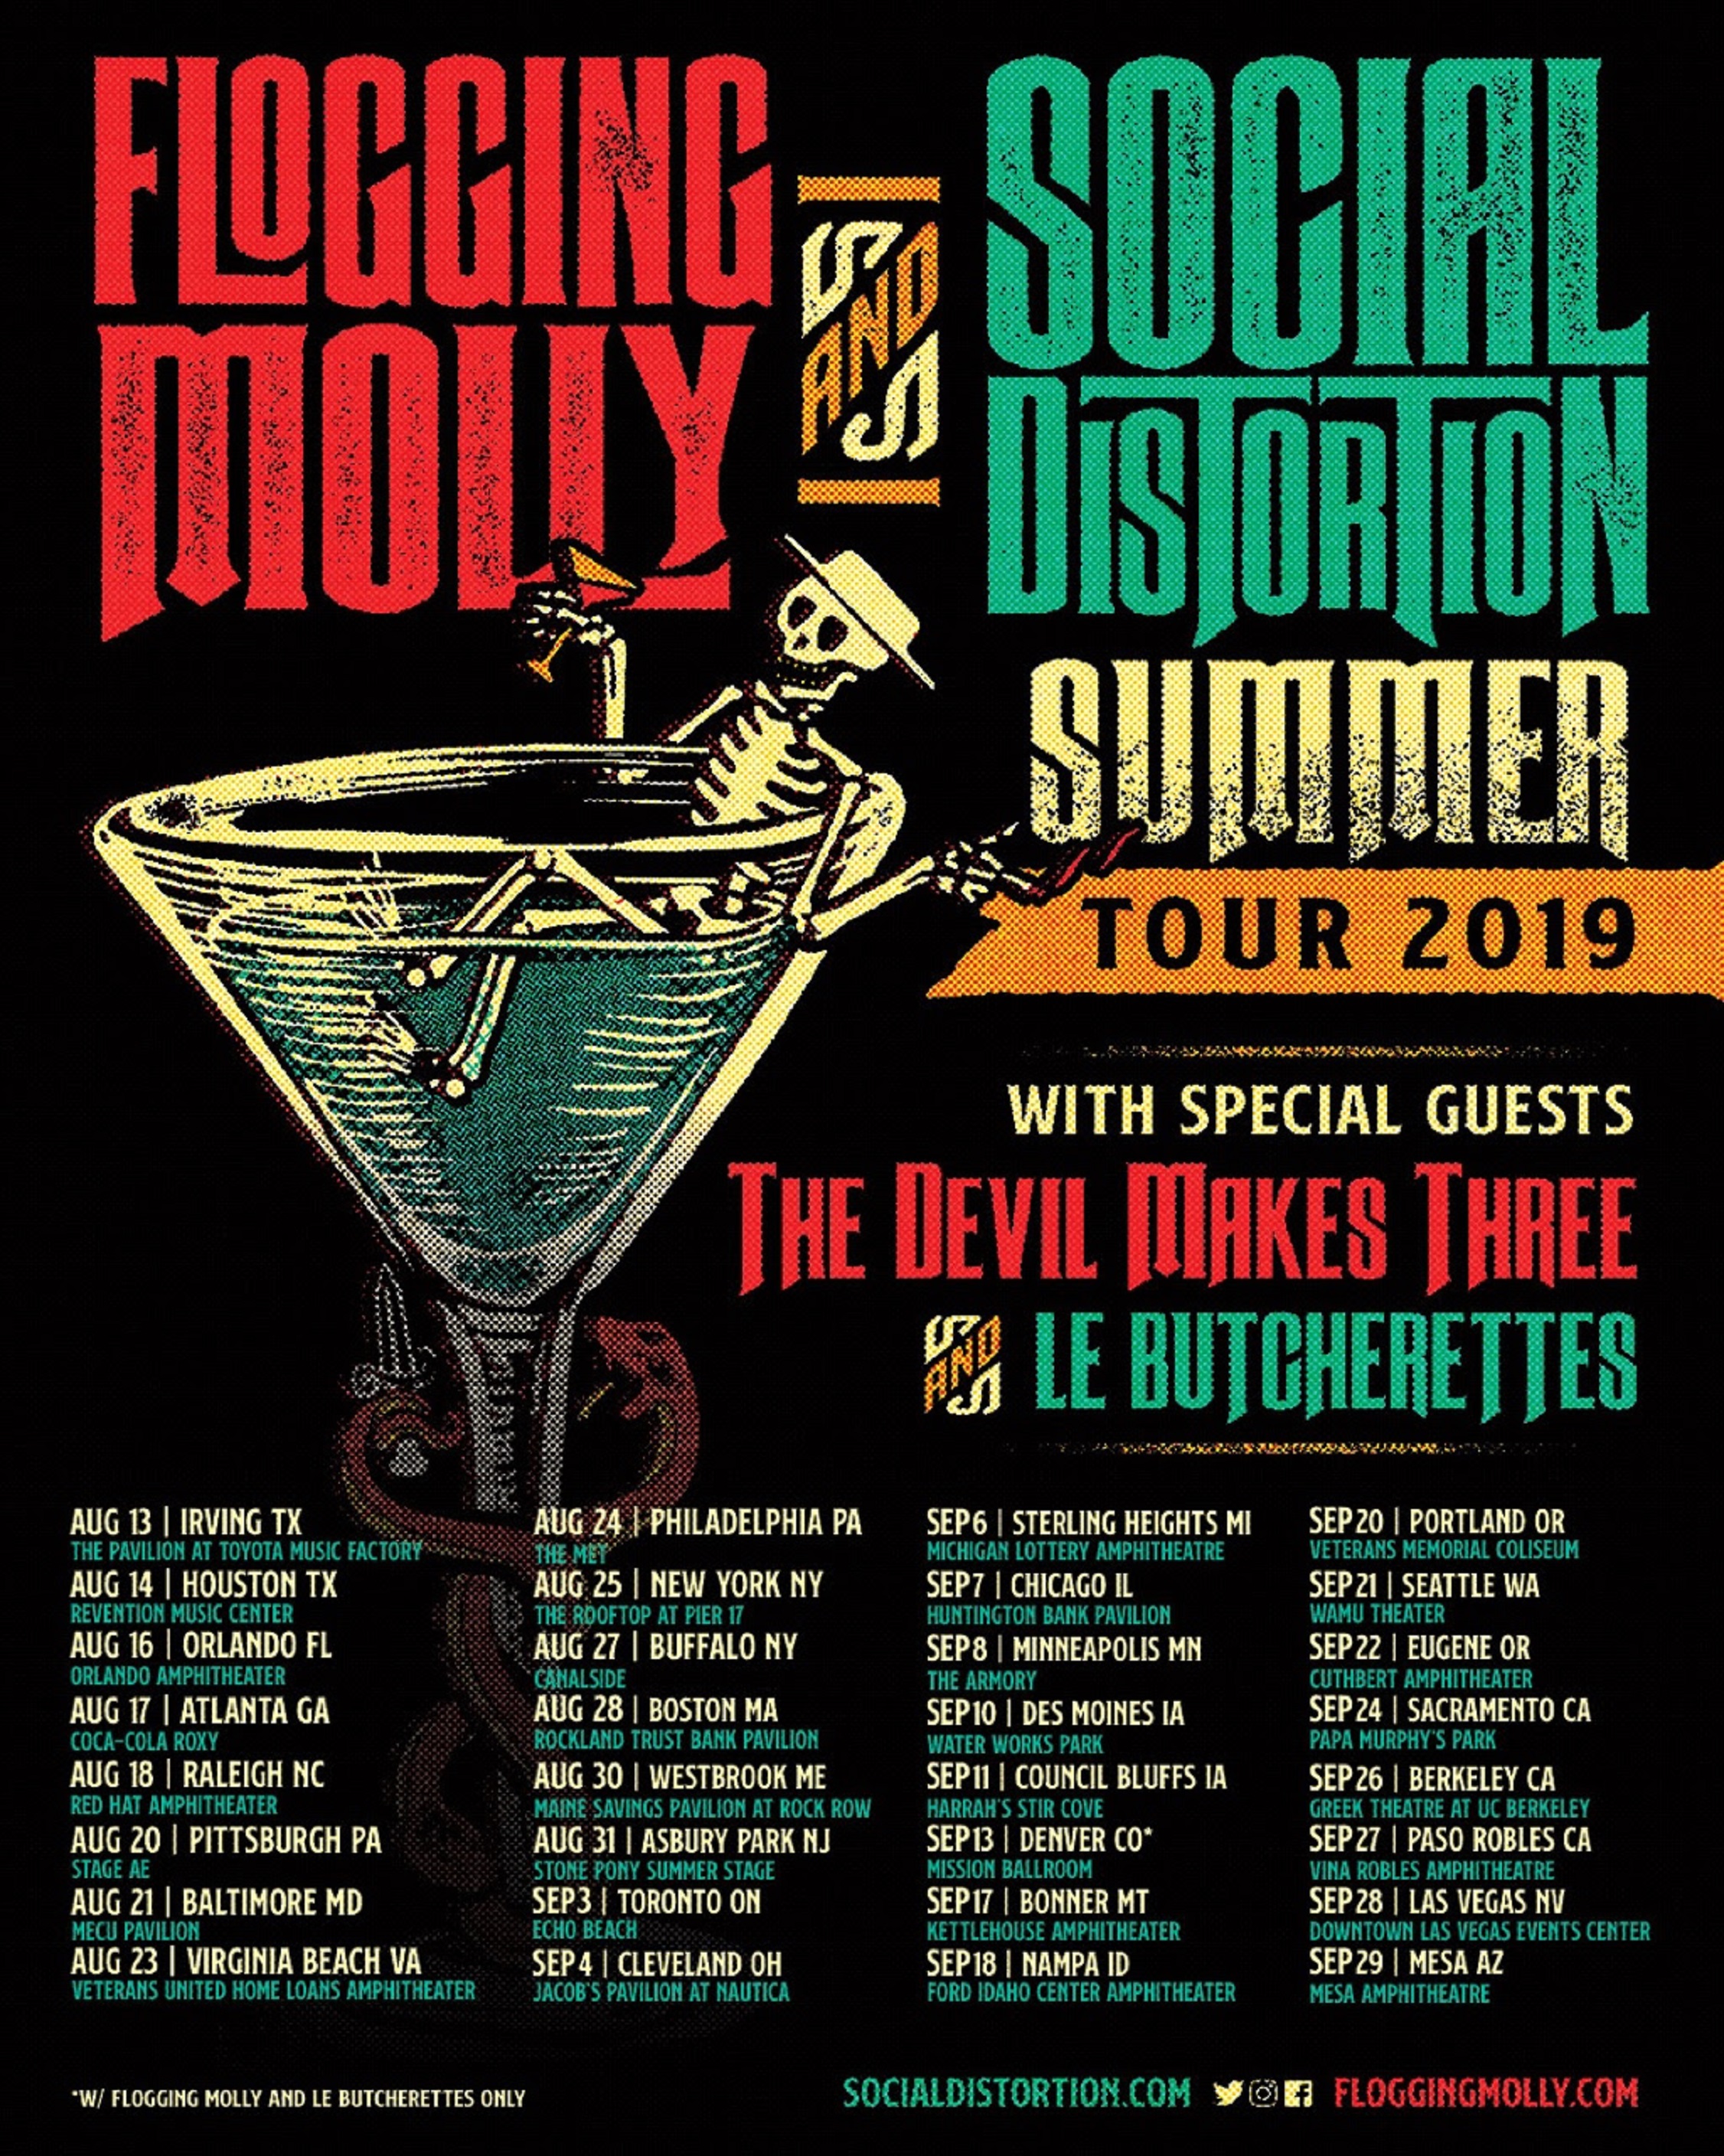 Flogging Molly and Social Distortion Announce Summer CoHeadline Tour